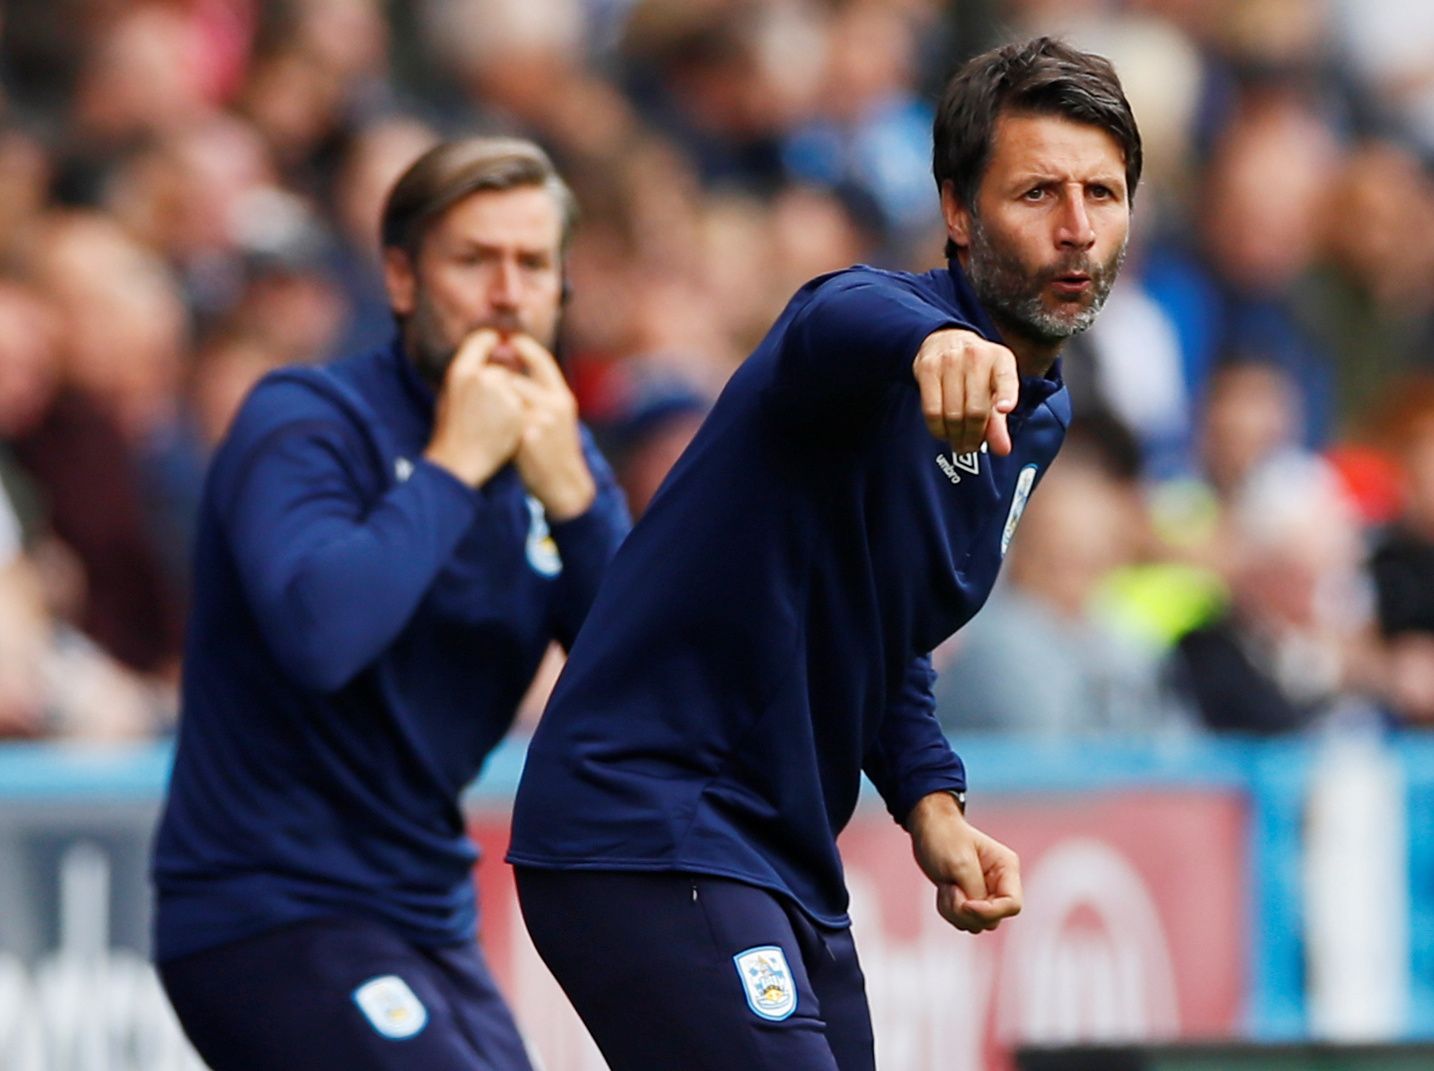 Soccer Football - Championship - Huddersfield Town v Sheffield Wednesday - John Smith's Stadium, Huddersfield, Britain - September 15, 2019   Huddersfield Town manager Danny Cowley and assistant manager Nicky Cowley gesture    Action Images/Jason Cairnduff    EDITORIAL USE ONLY. No use with unauthorized audio, video, data, fixture lists, club/league logos or 